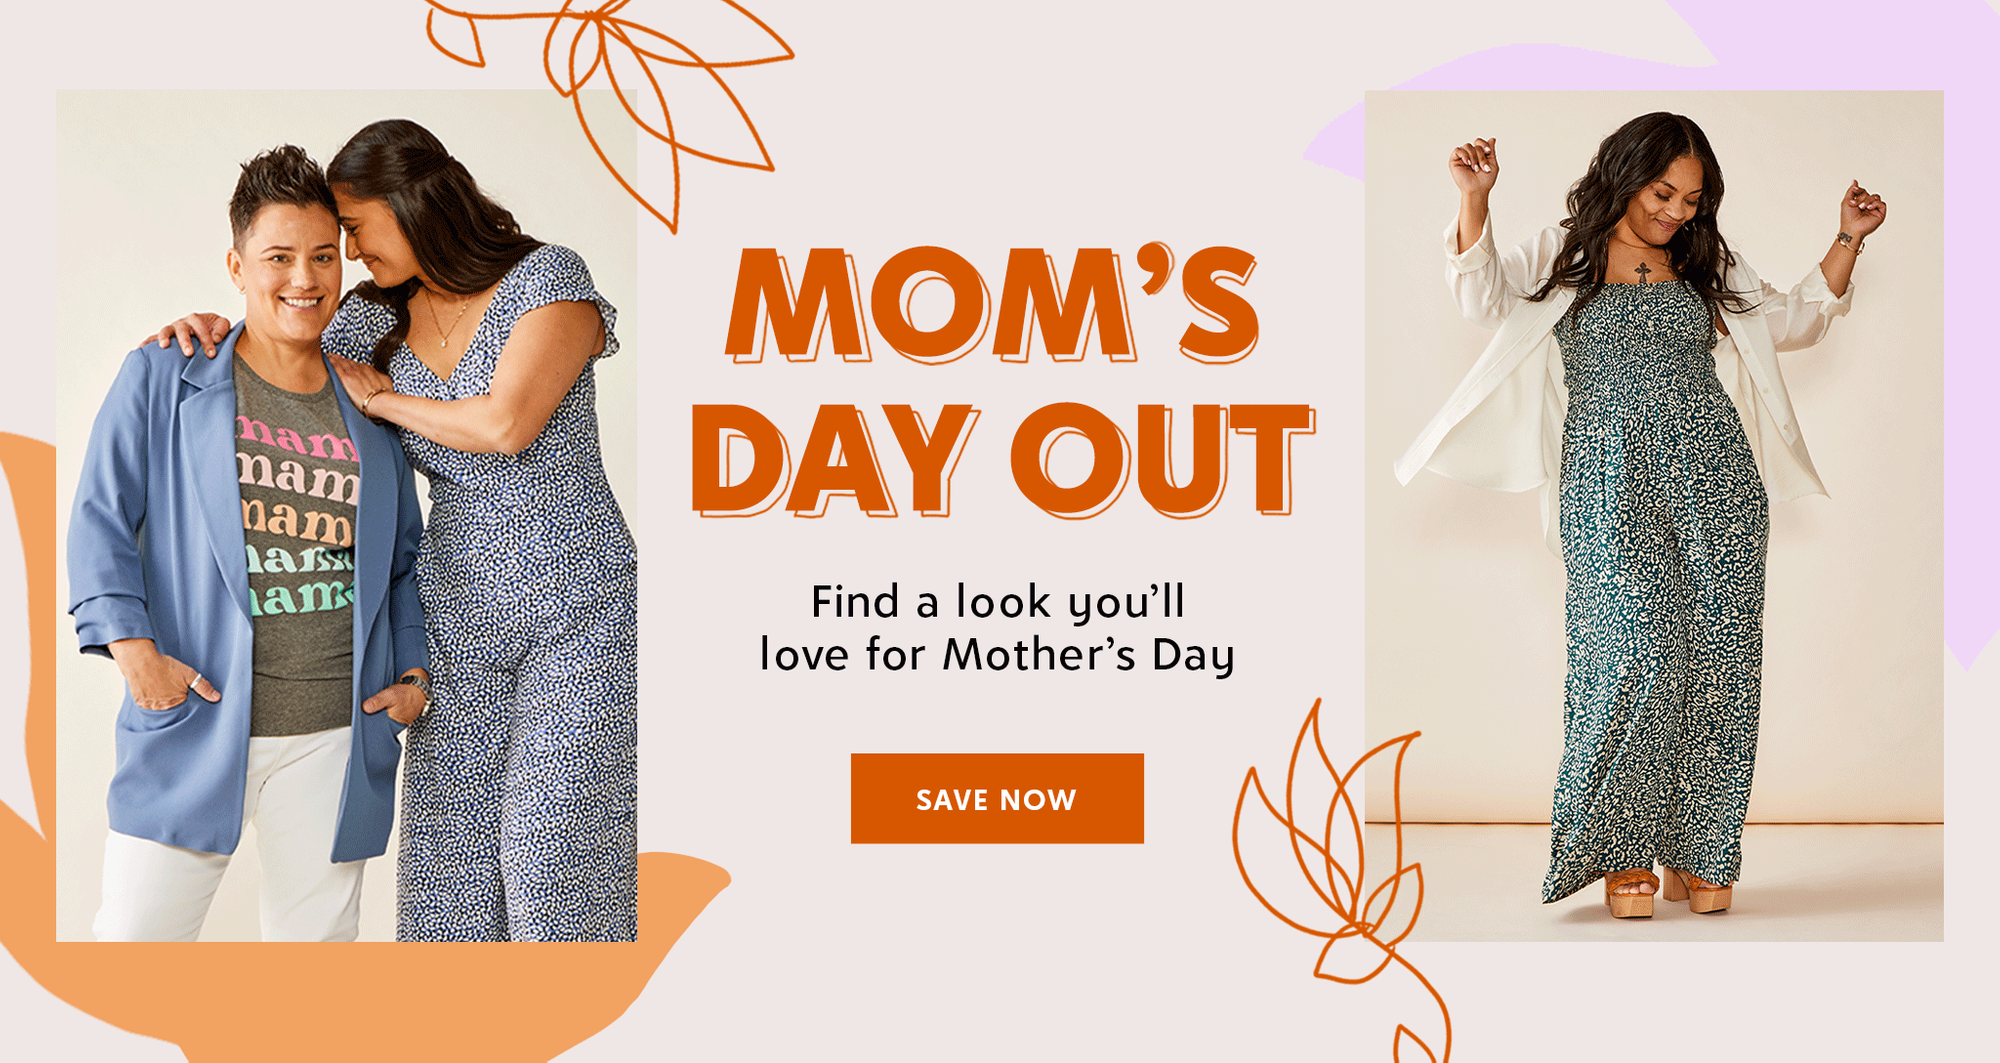 mom's day out - find a look you'll love for mother's day - save now